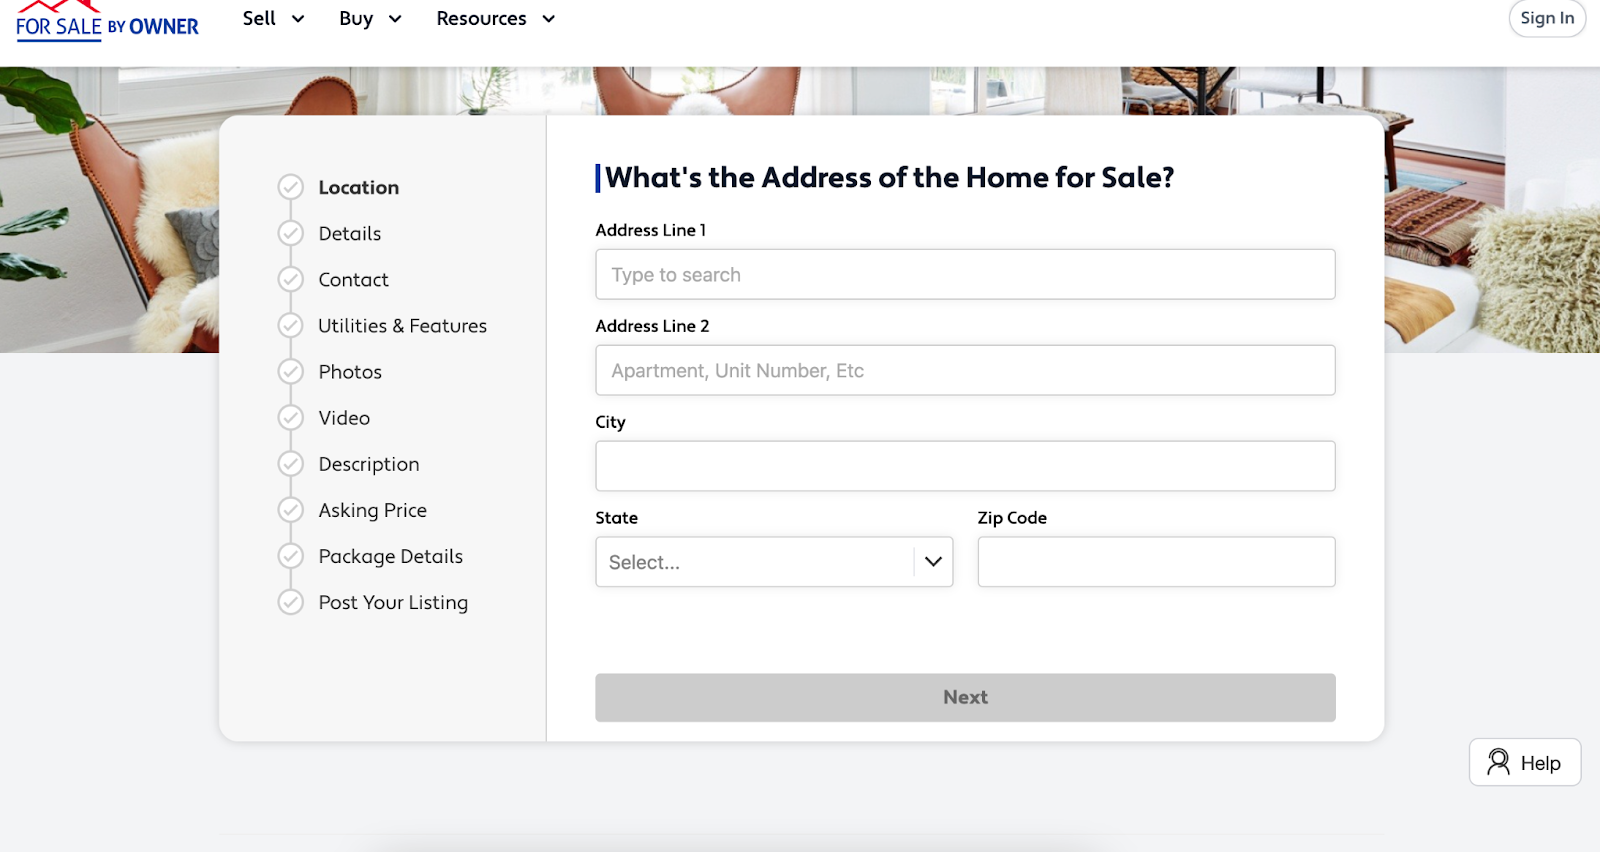 Screen capture of questionnaire to list a house on ForSaleByOwner.com